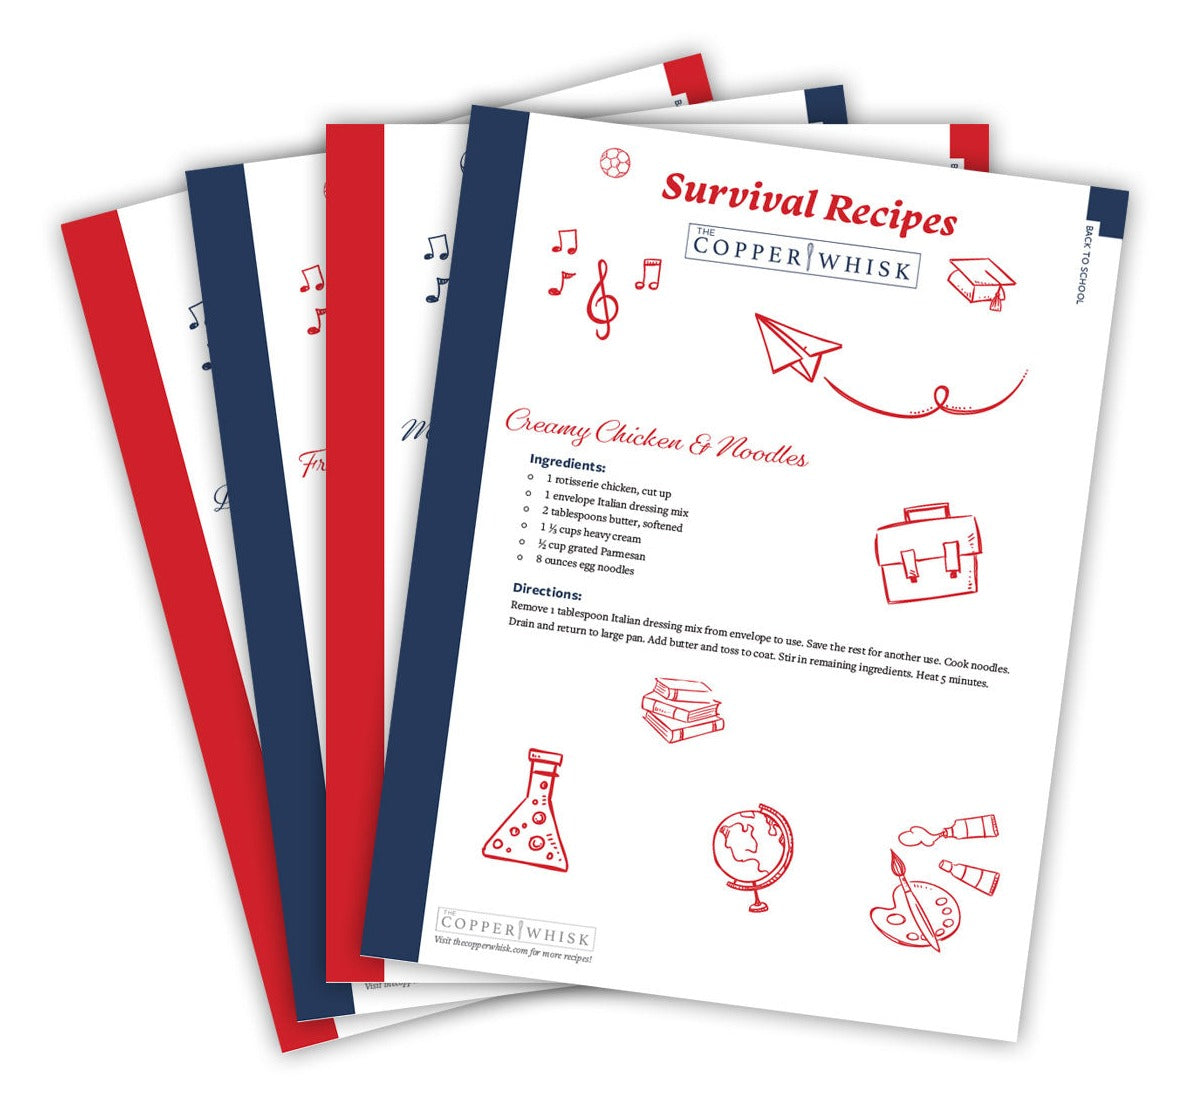 Survival Recipes: Back to School Ideas from The Copper Whisk (Physical Recipe Cards)